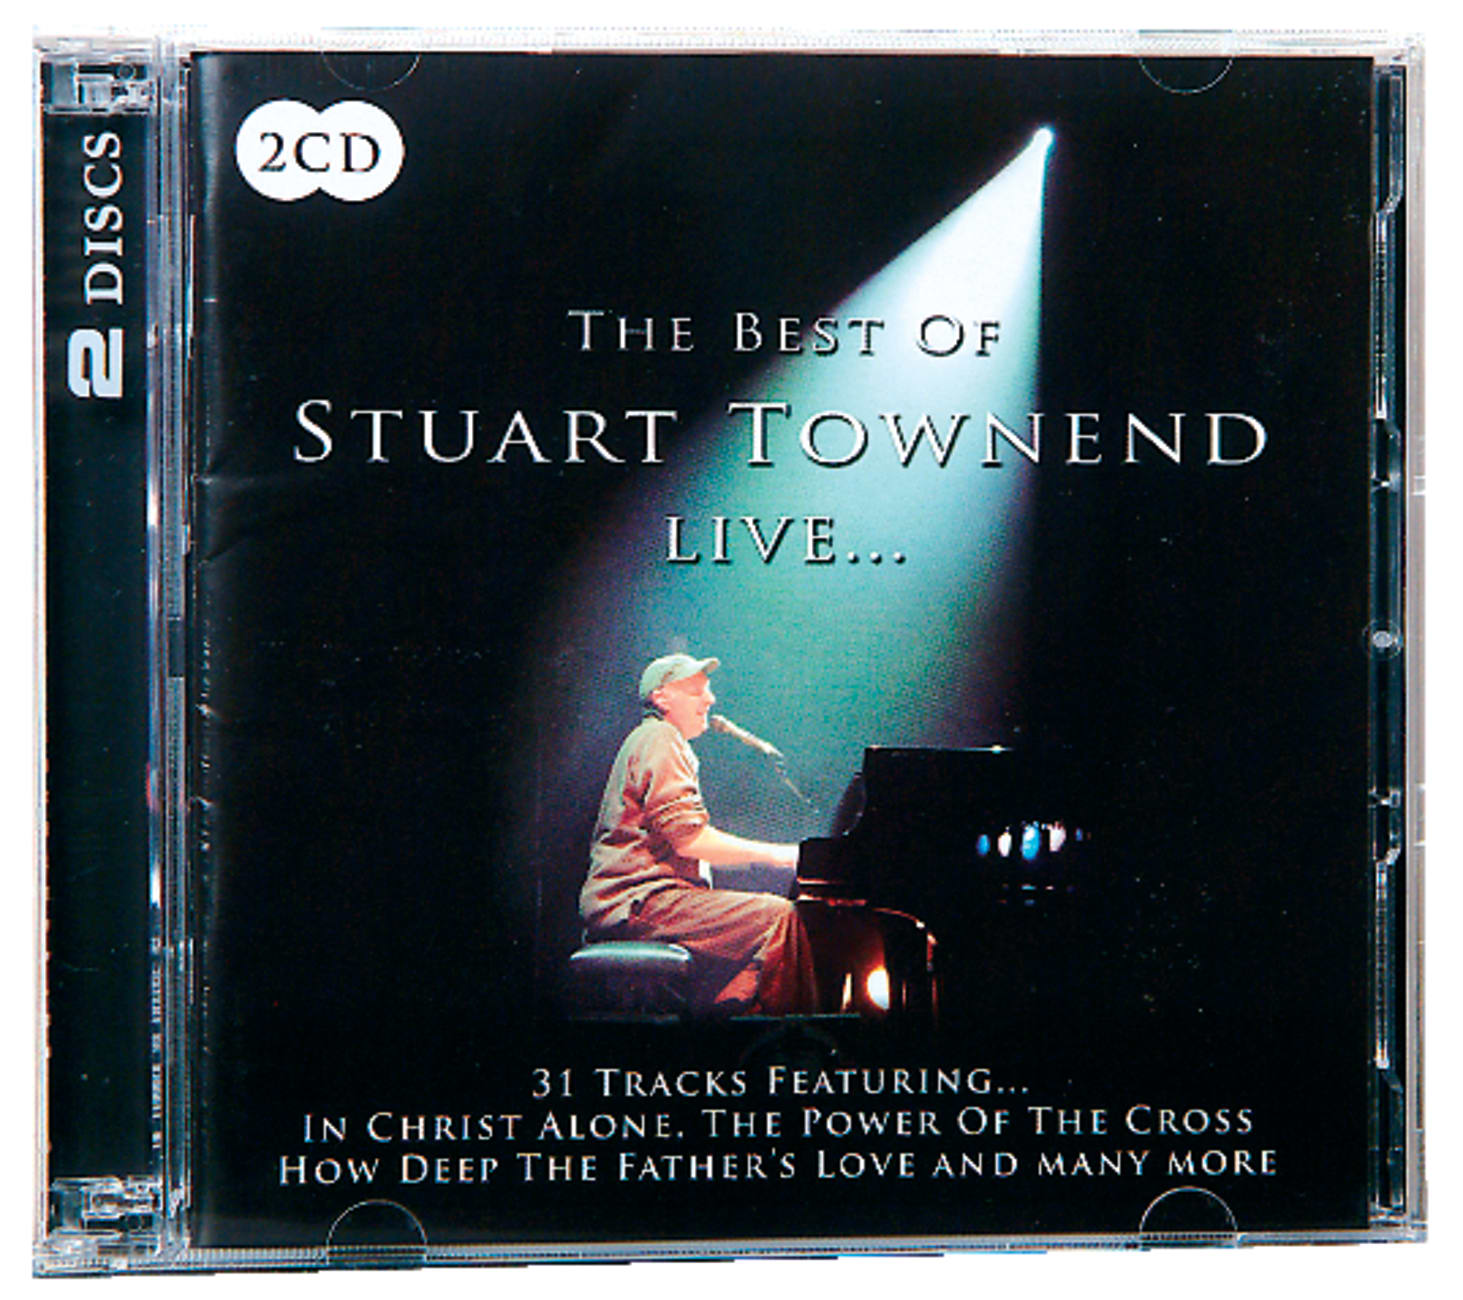 The Best of Stuart Townend Compact Disk